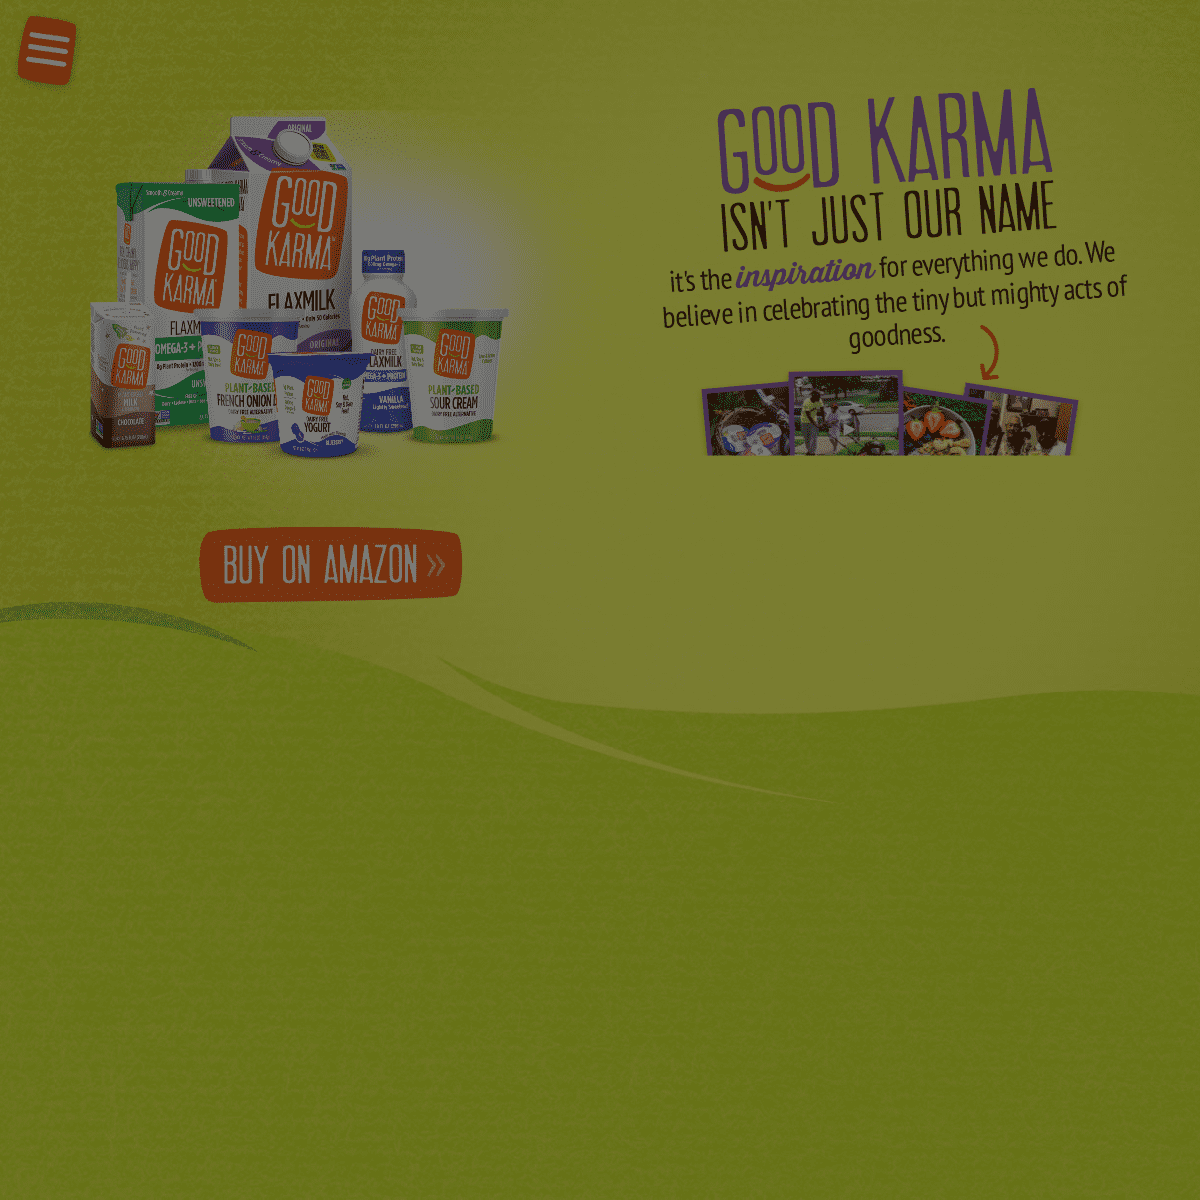 A complete backup of goodkarmafoods.com